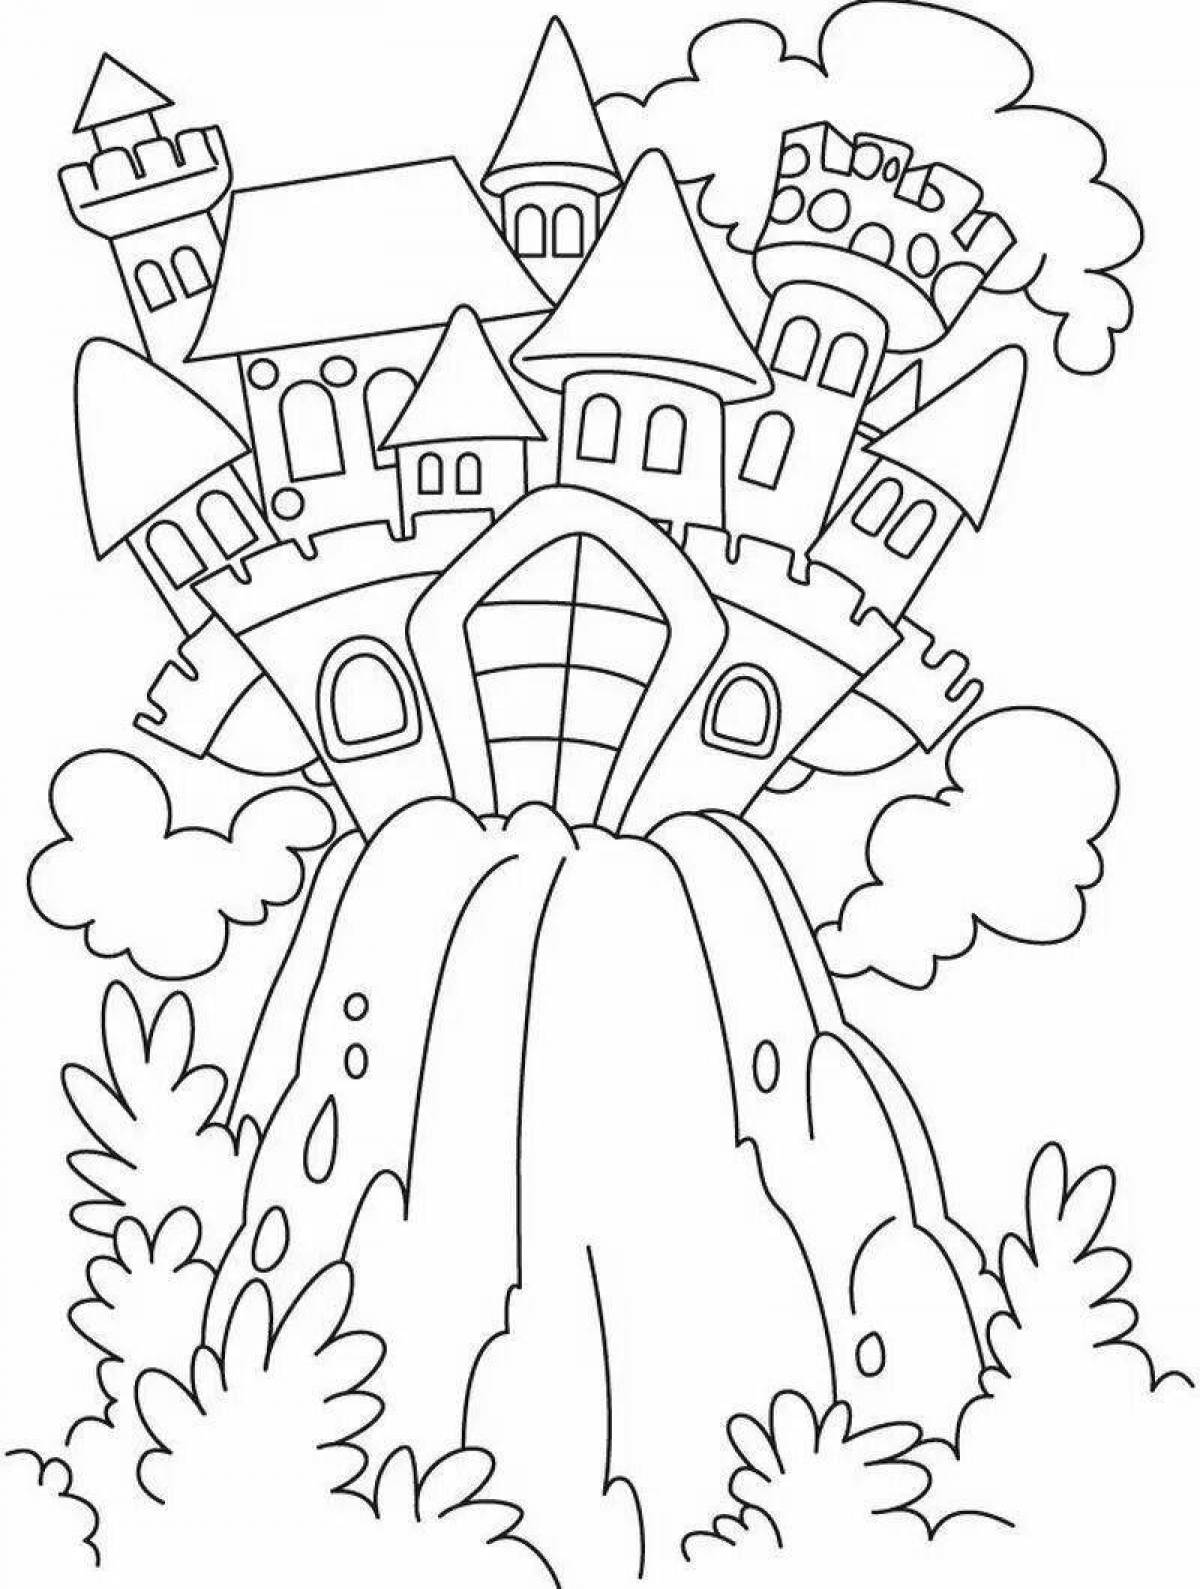 Wonderful city coloring pages for kids